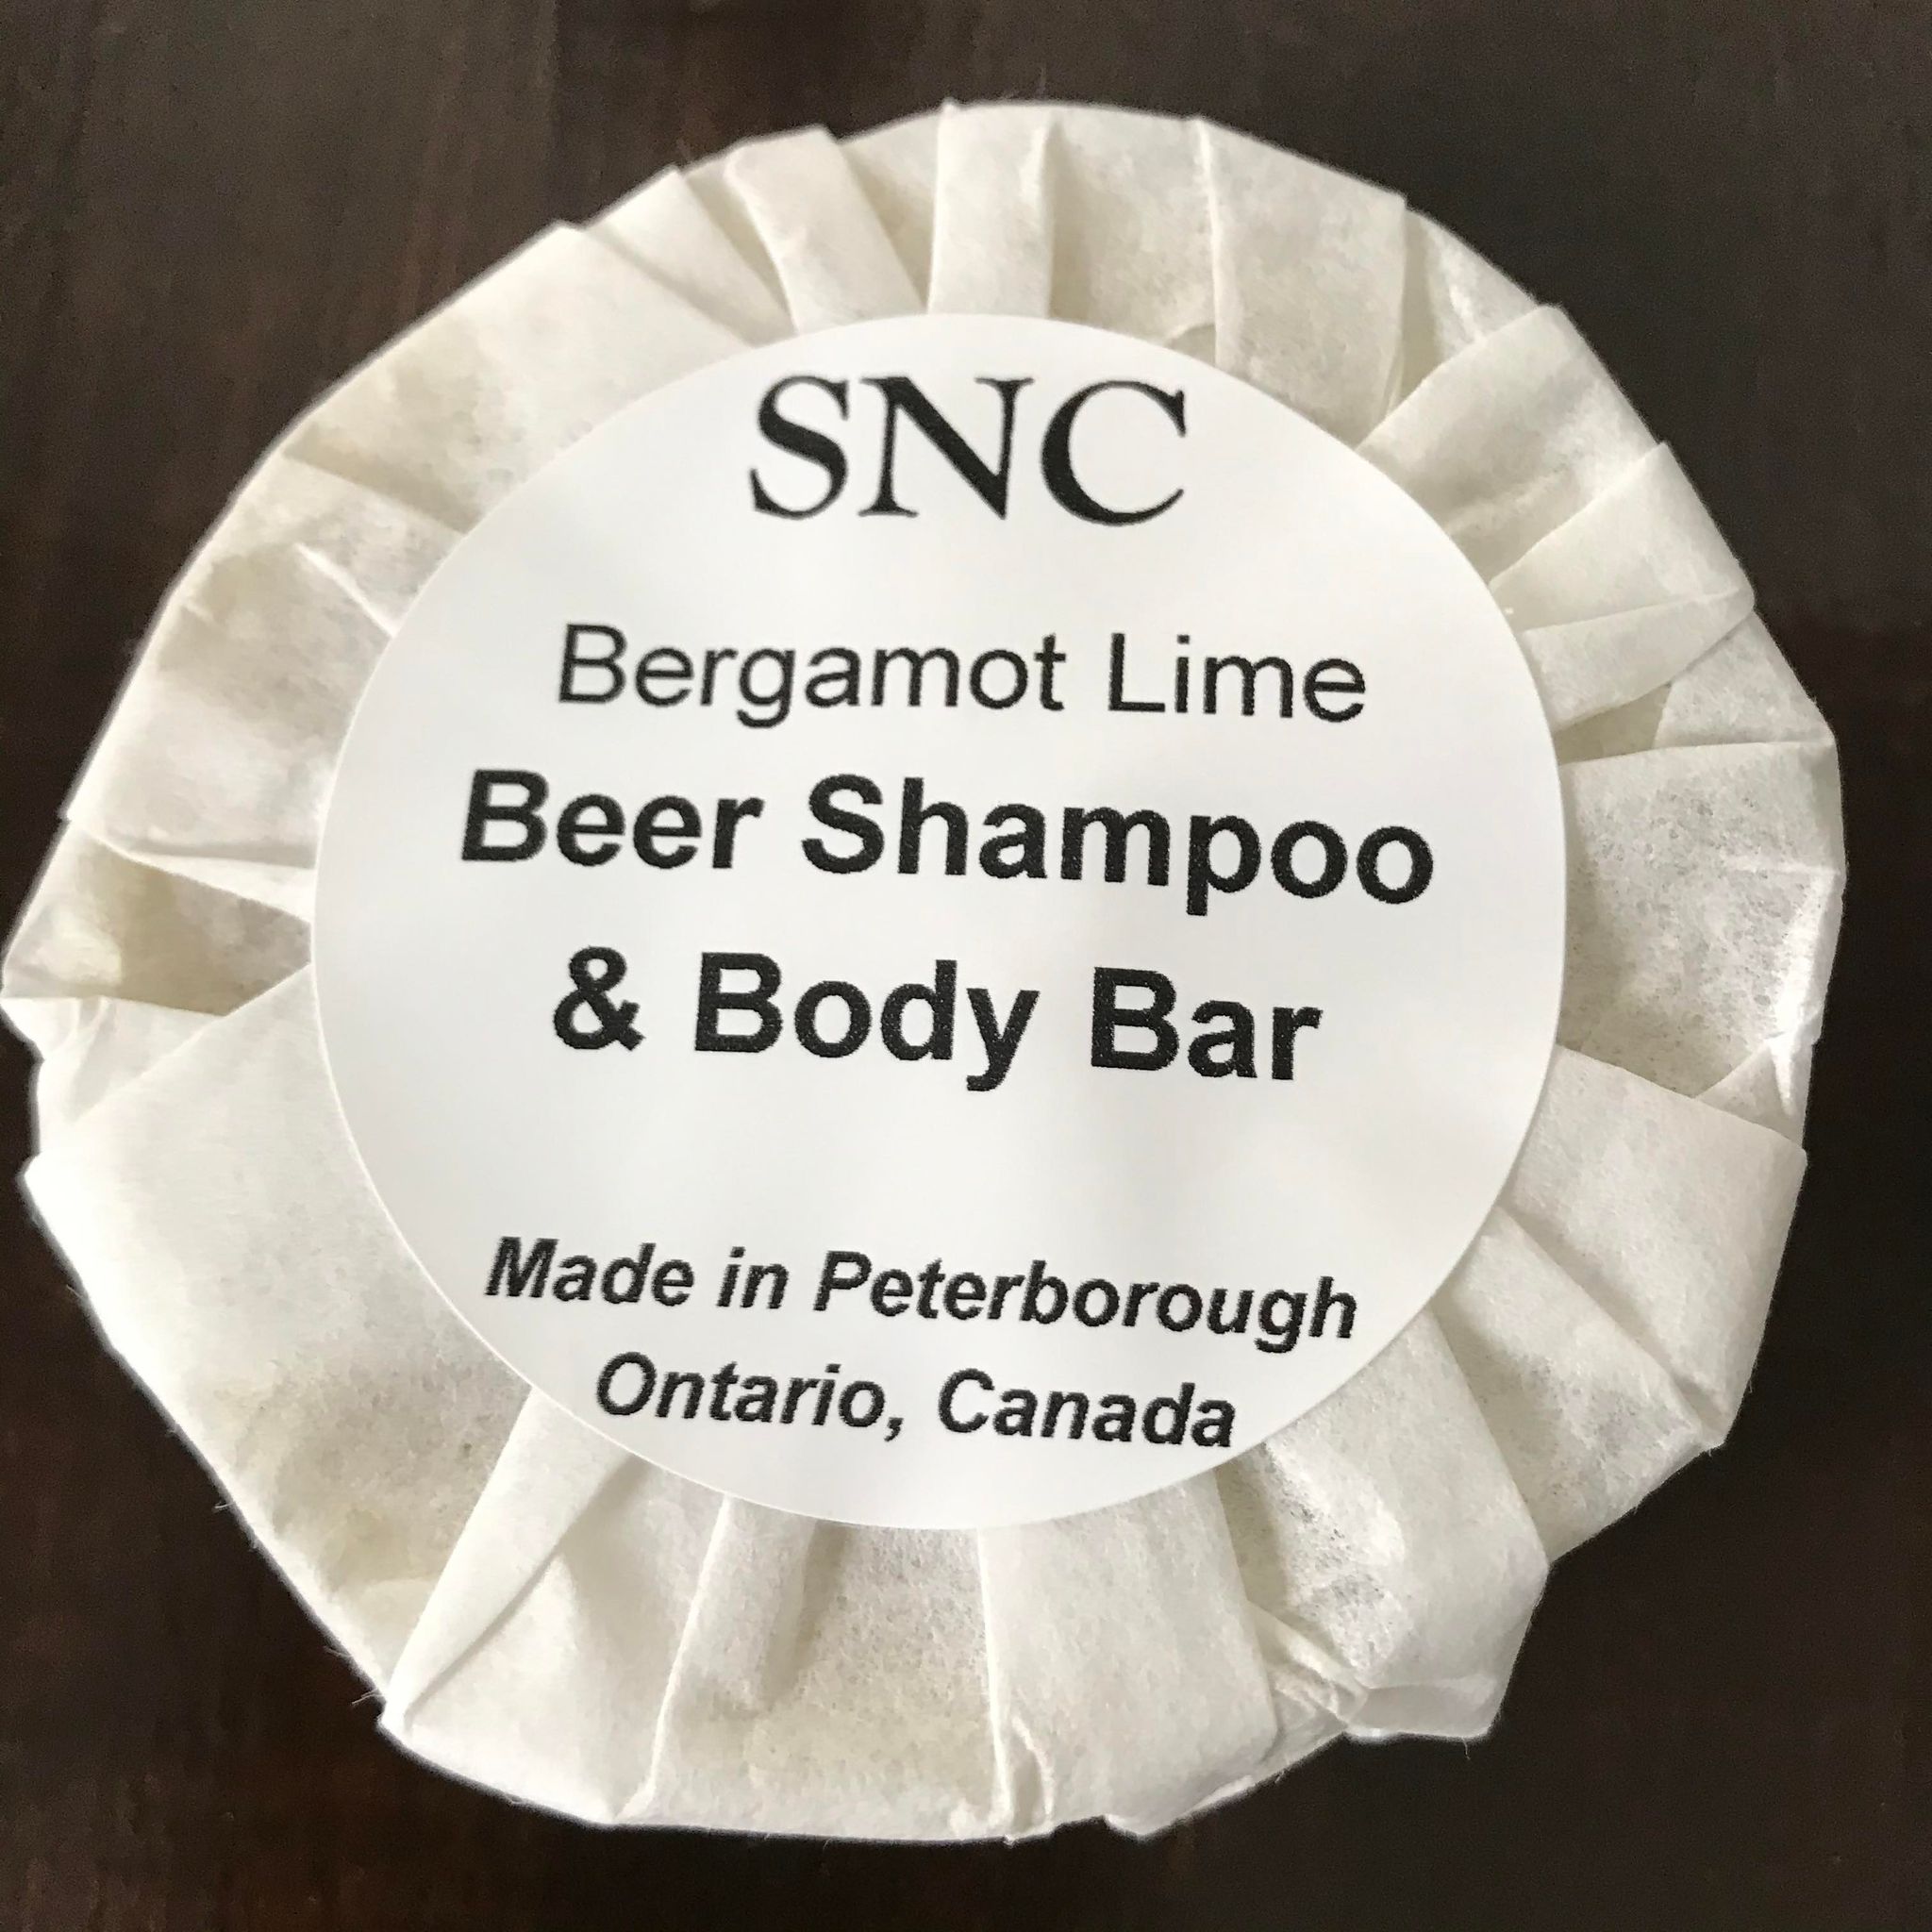 Canadian made Simply Natural Canada SNC bergamot lime essential oil beer shampoo and body bar made in small batches with local craft beer